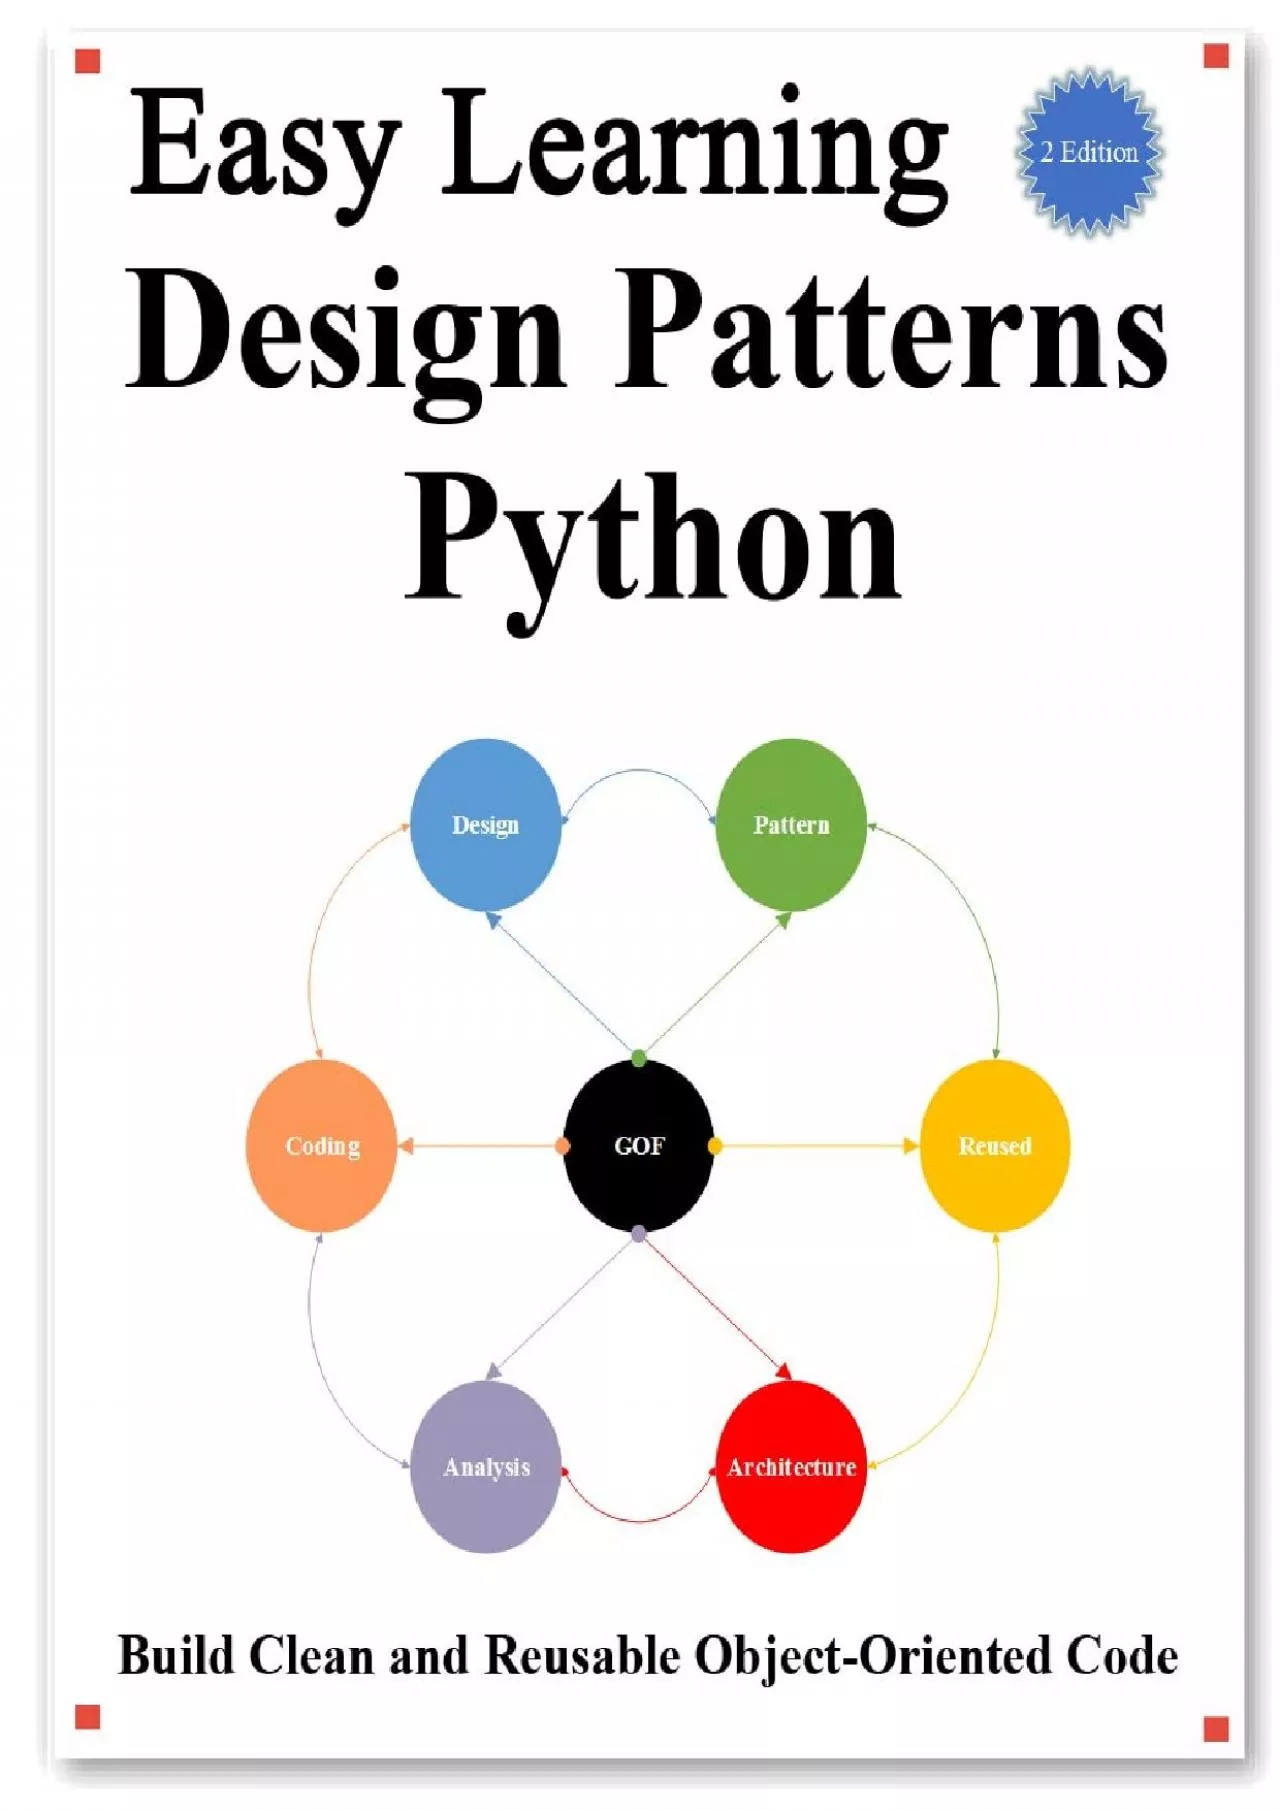 [DOWLOAD]-Easy Learning Design Patterns Python (2 Edition): Build Better and Reusable